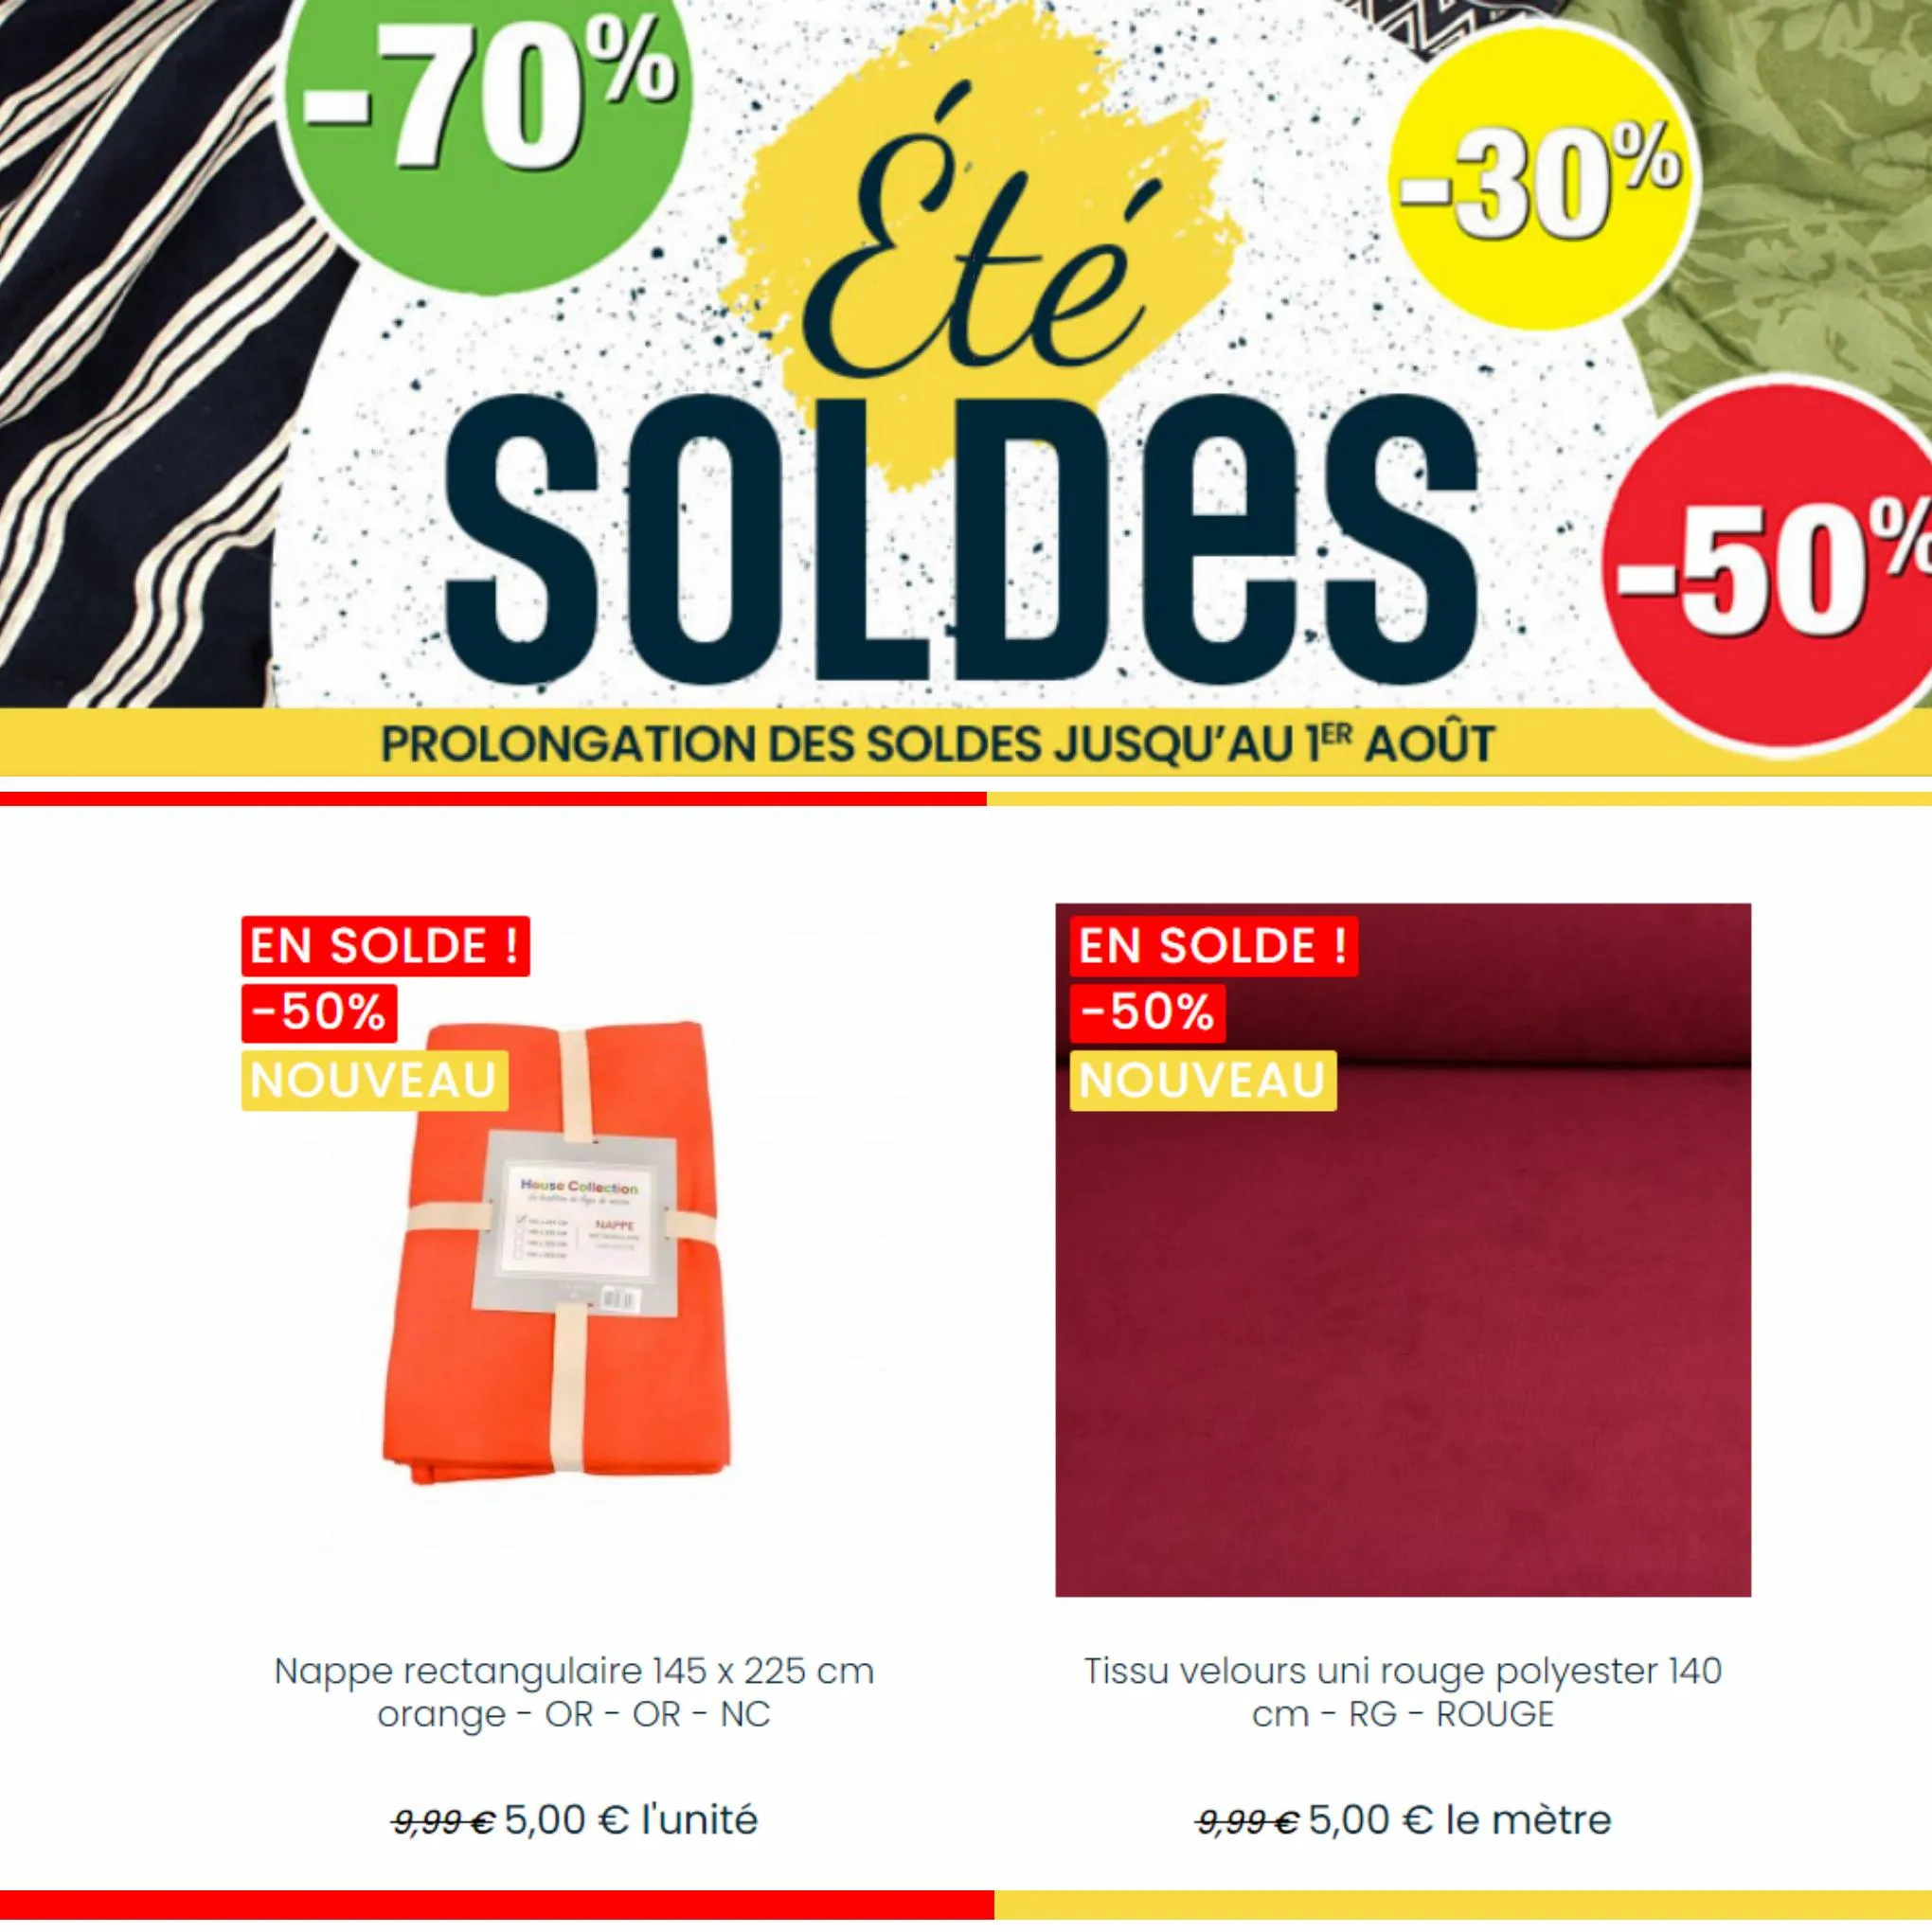 Catalogue Toto Soldes, page 00004